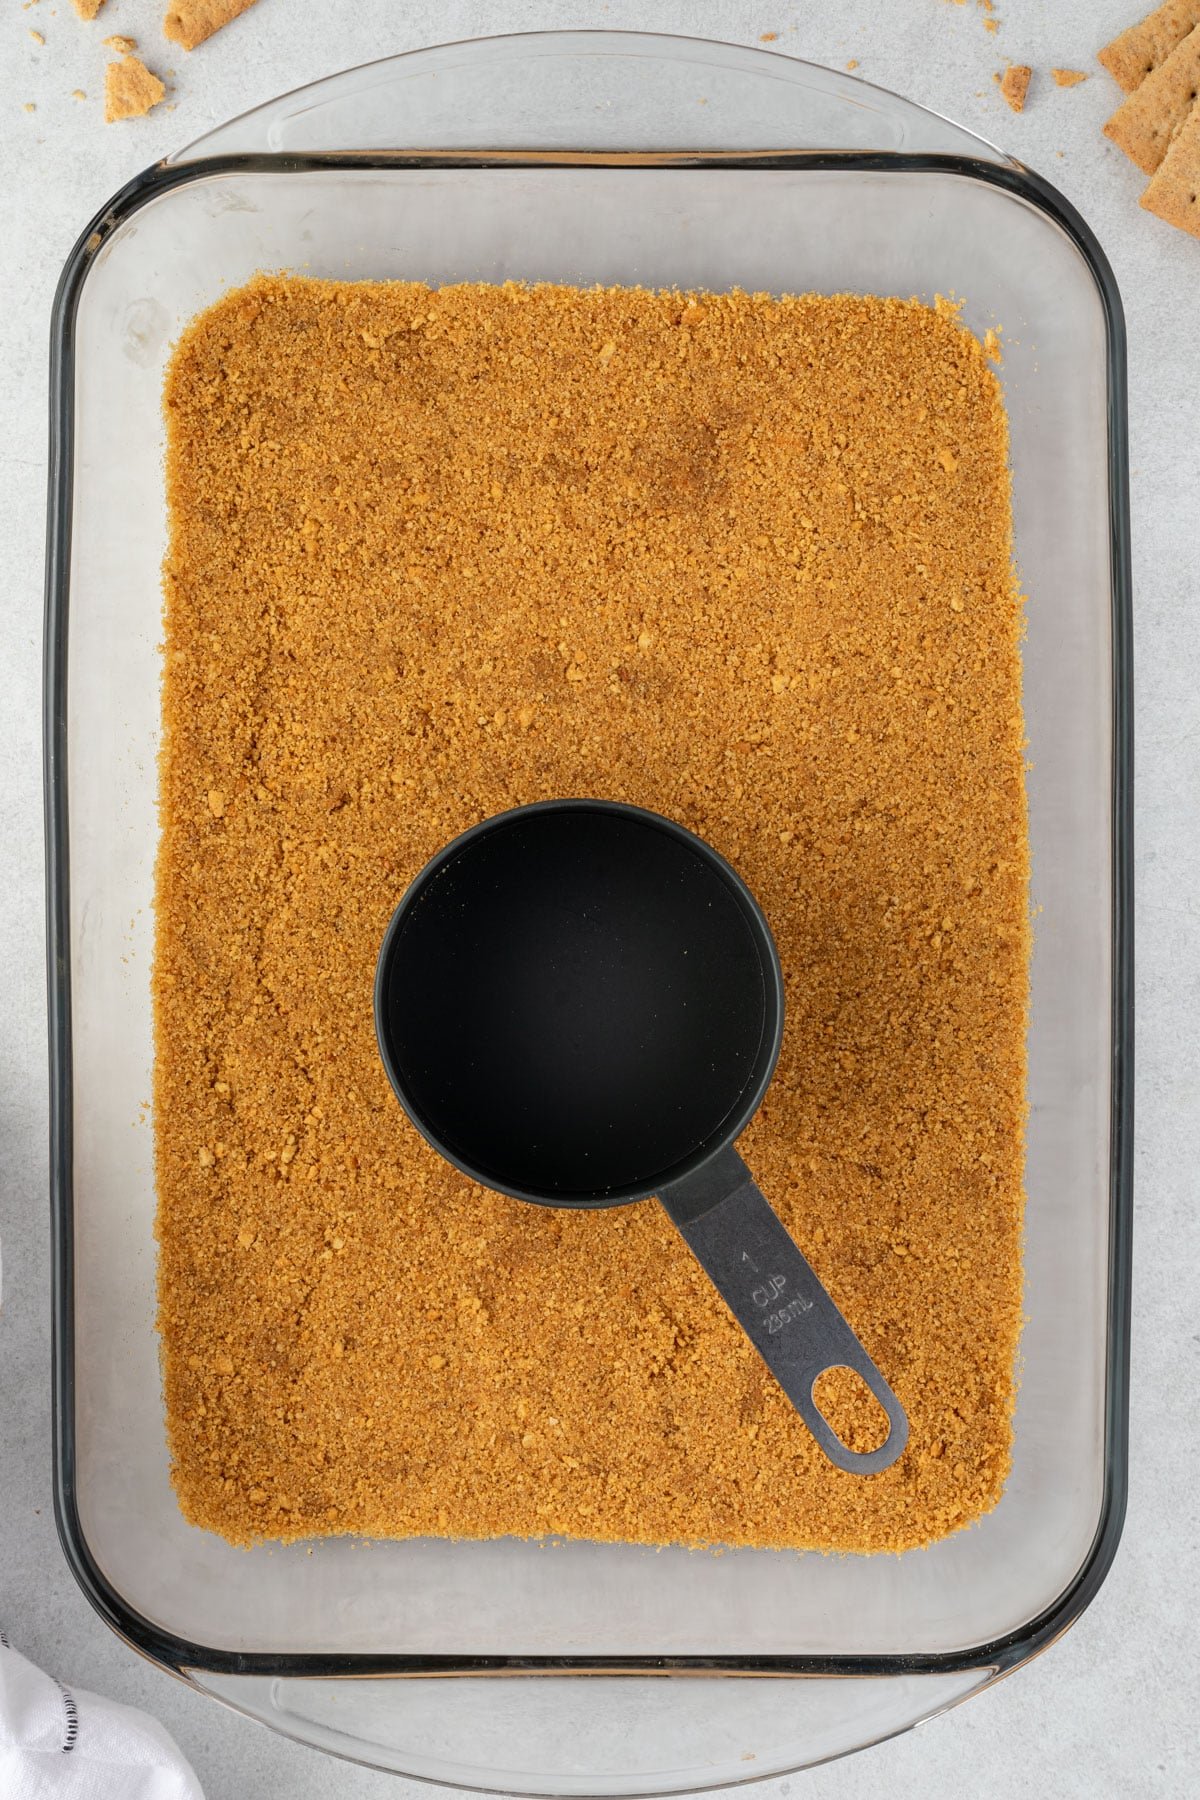 A glass 9x13 pan with a graham cracker crust pressed into it and a black measurign cup centered on the crust.